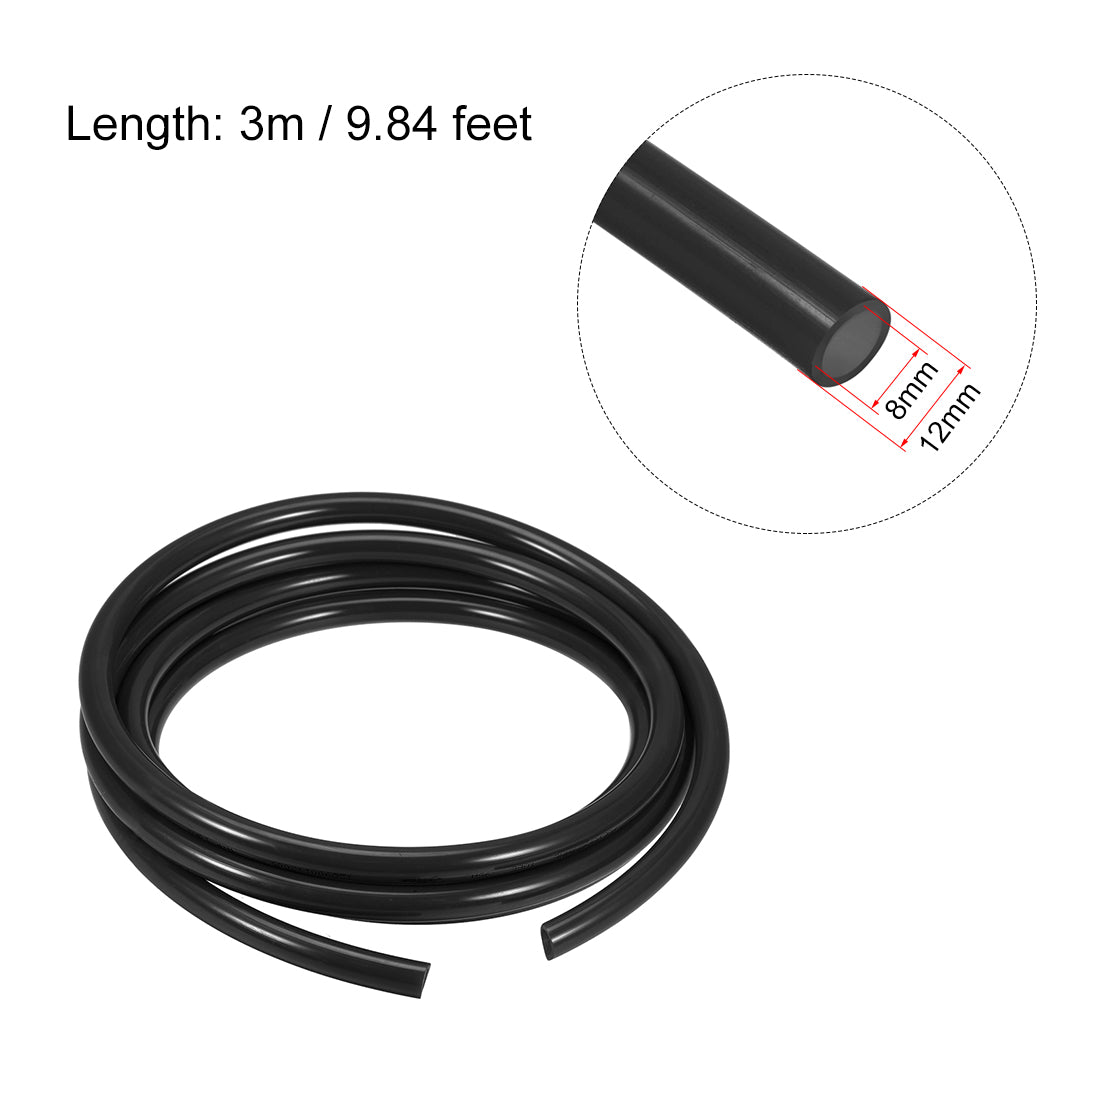 Uxcell Uxcell 12mm OD 8mm ID 5m Long Black PU Air Tubing Pipe Hose for Air Line Tube Fluid Transfer Pneumatic Tubing